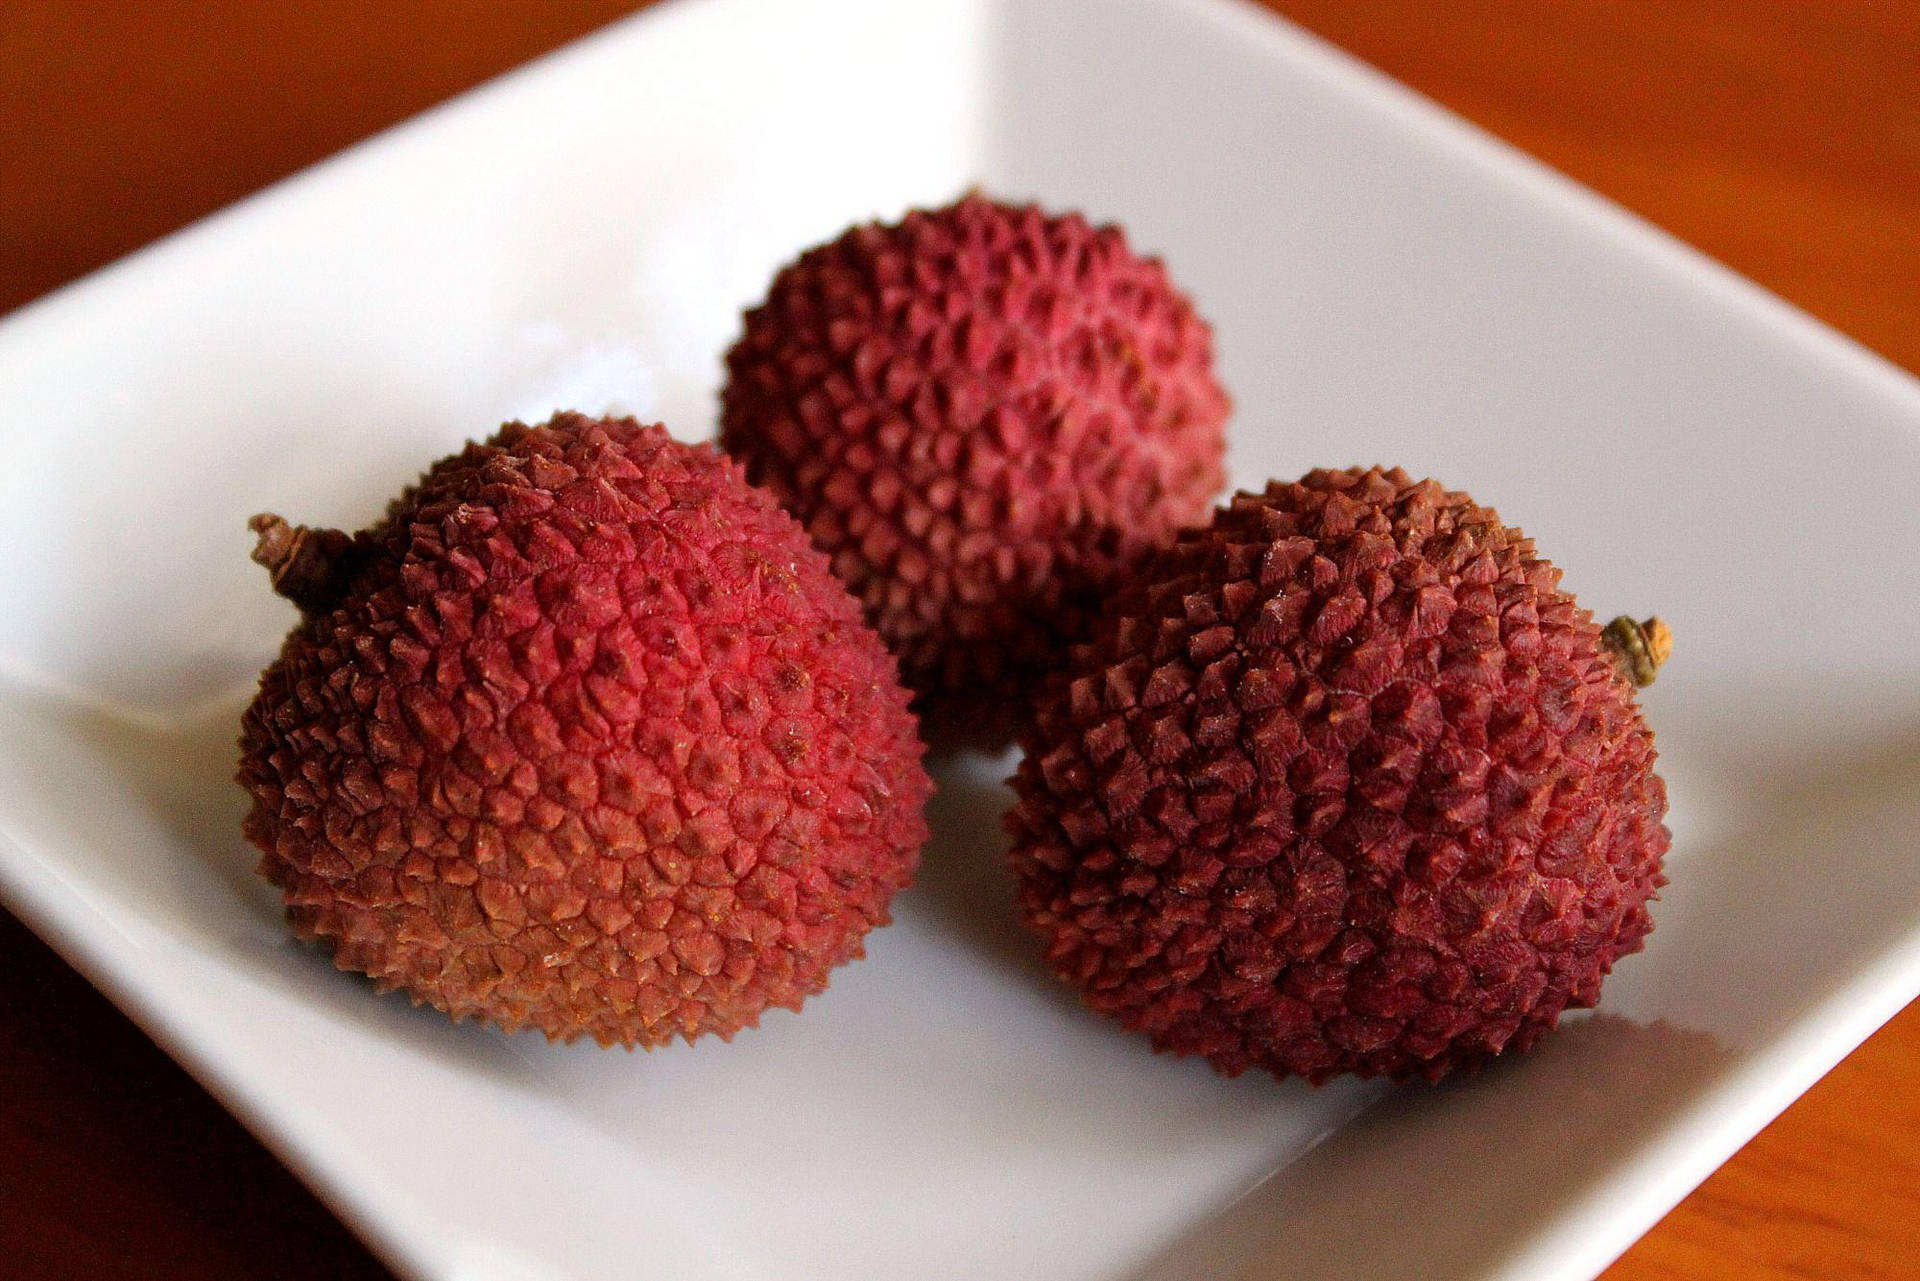 Three Litchis On Plate